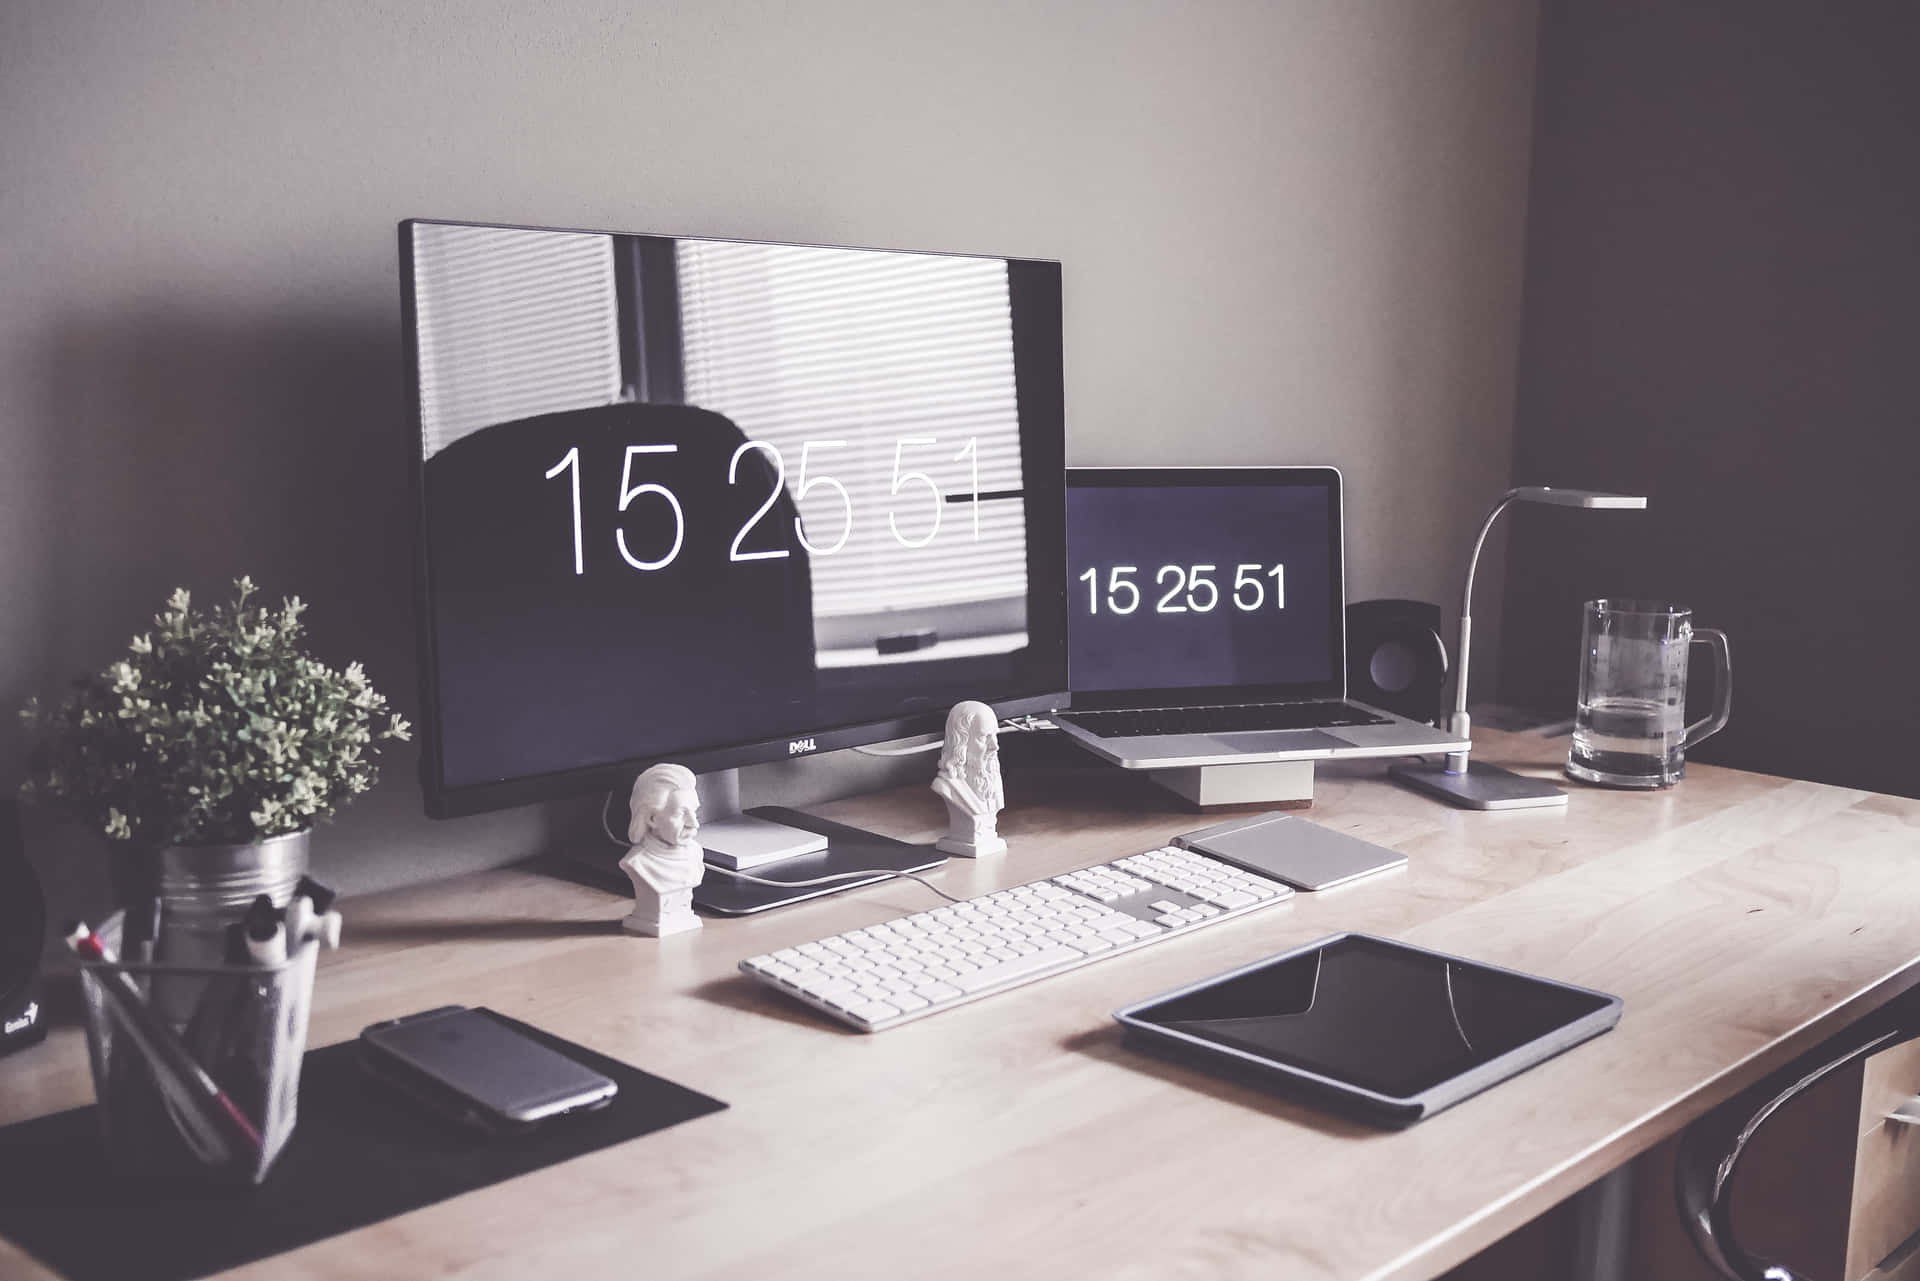 A Desk With A Computer, Monitor, And A Clock